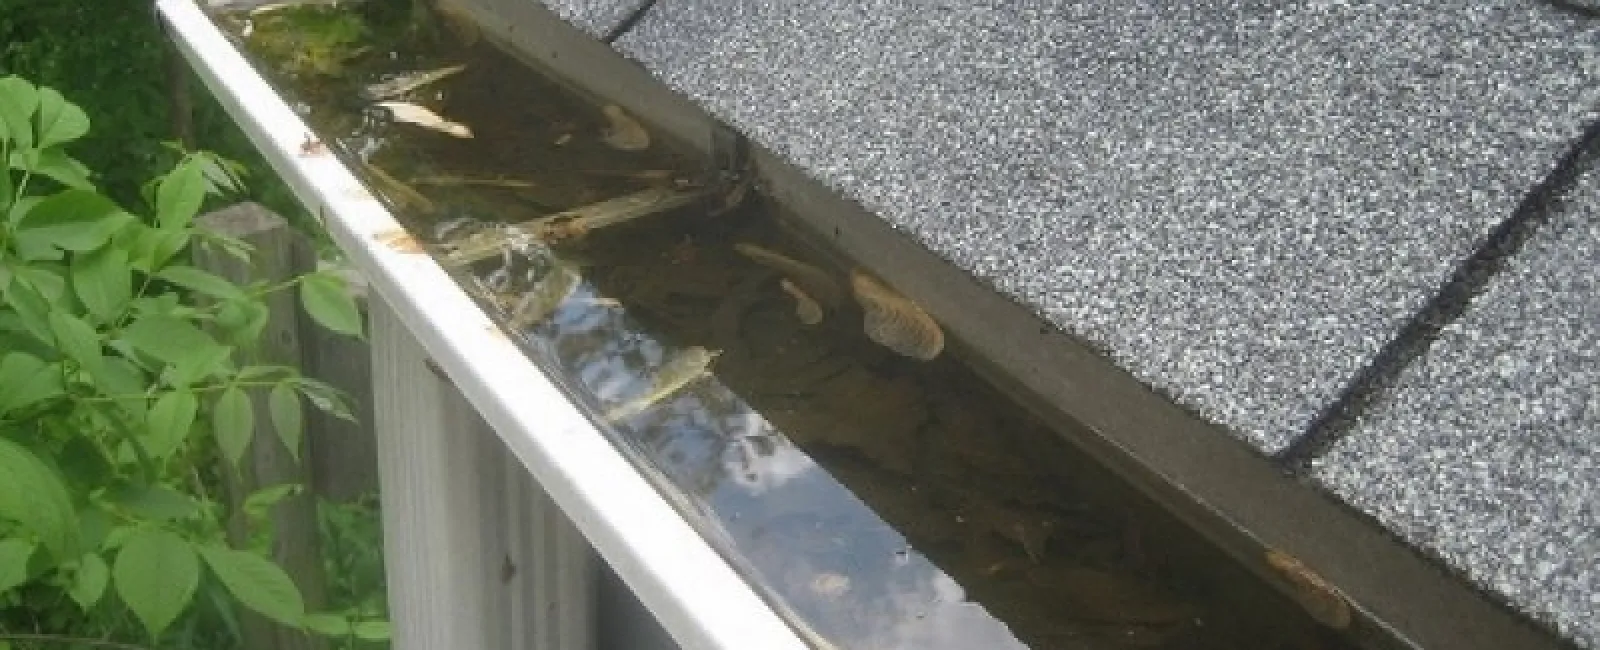 Four Benefits to Cleaning Your Gutters This Winter